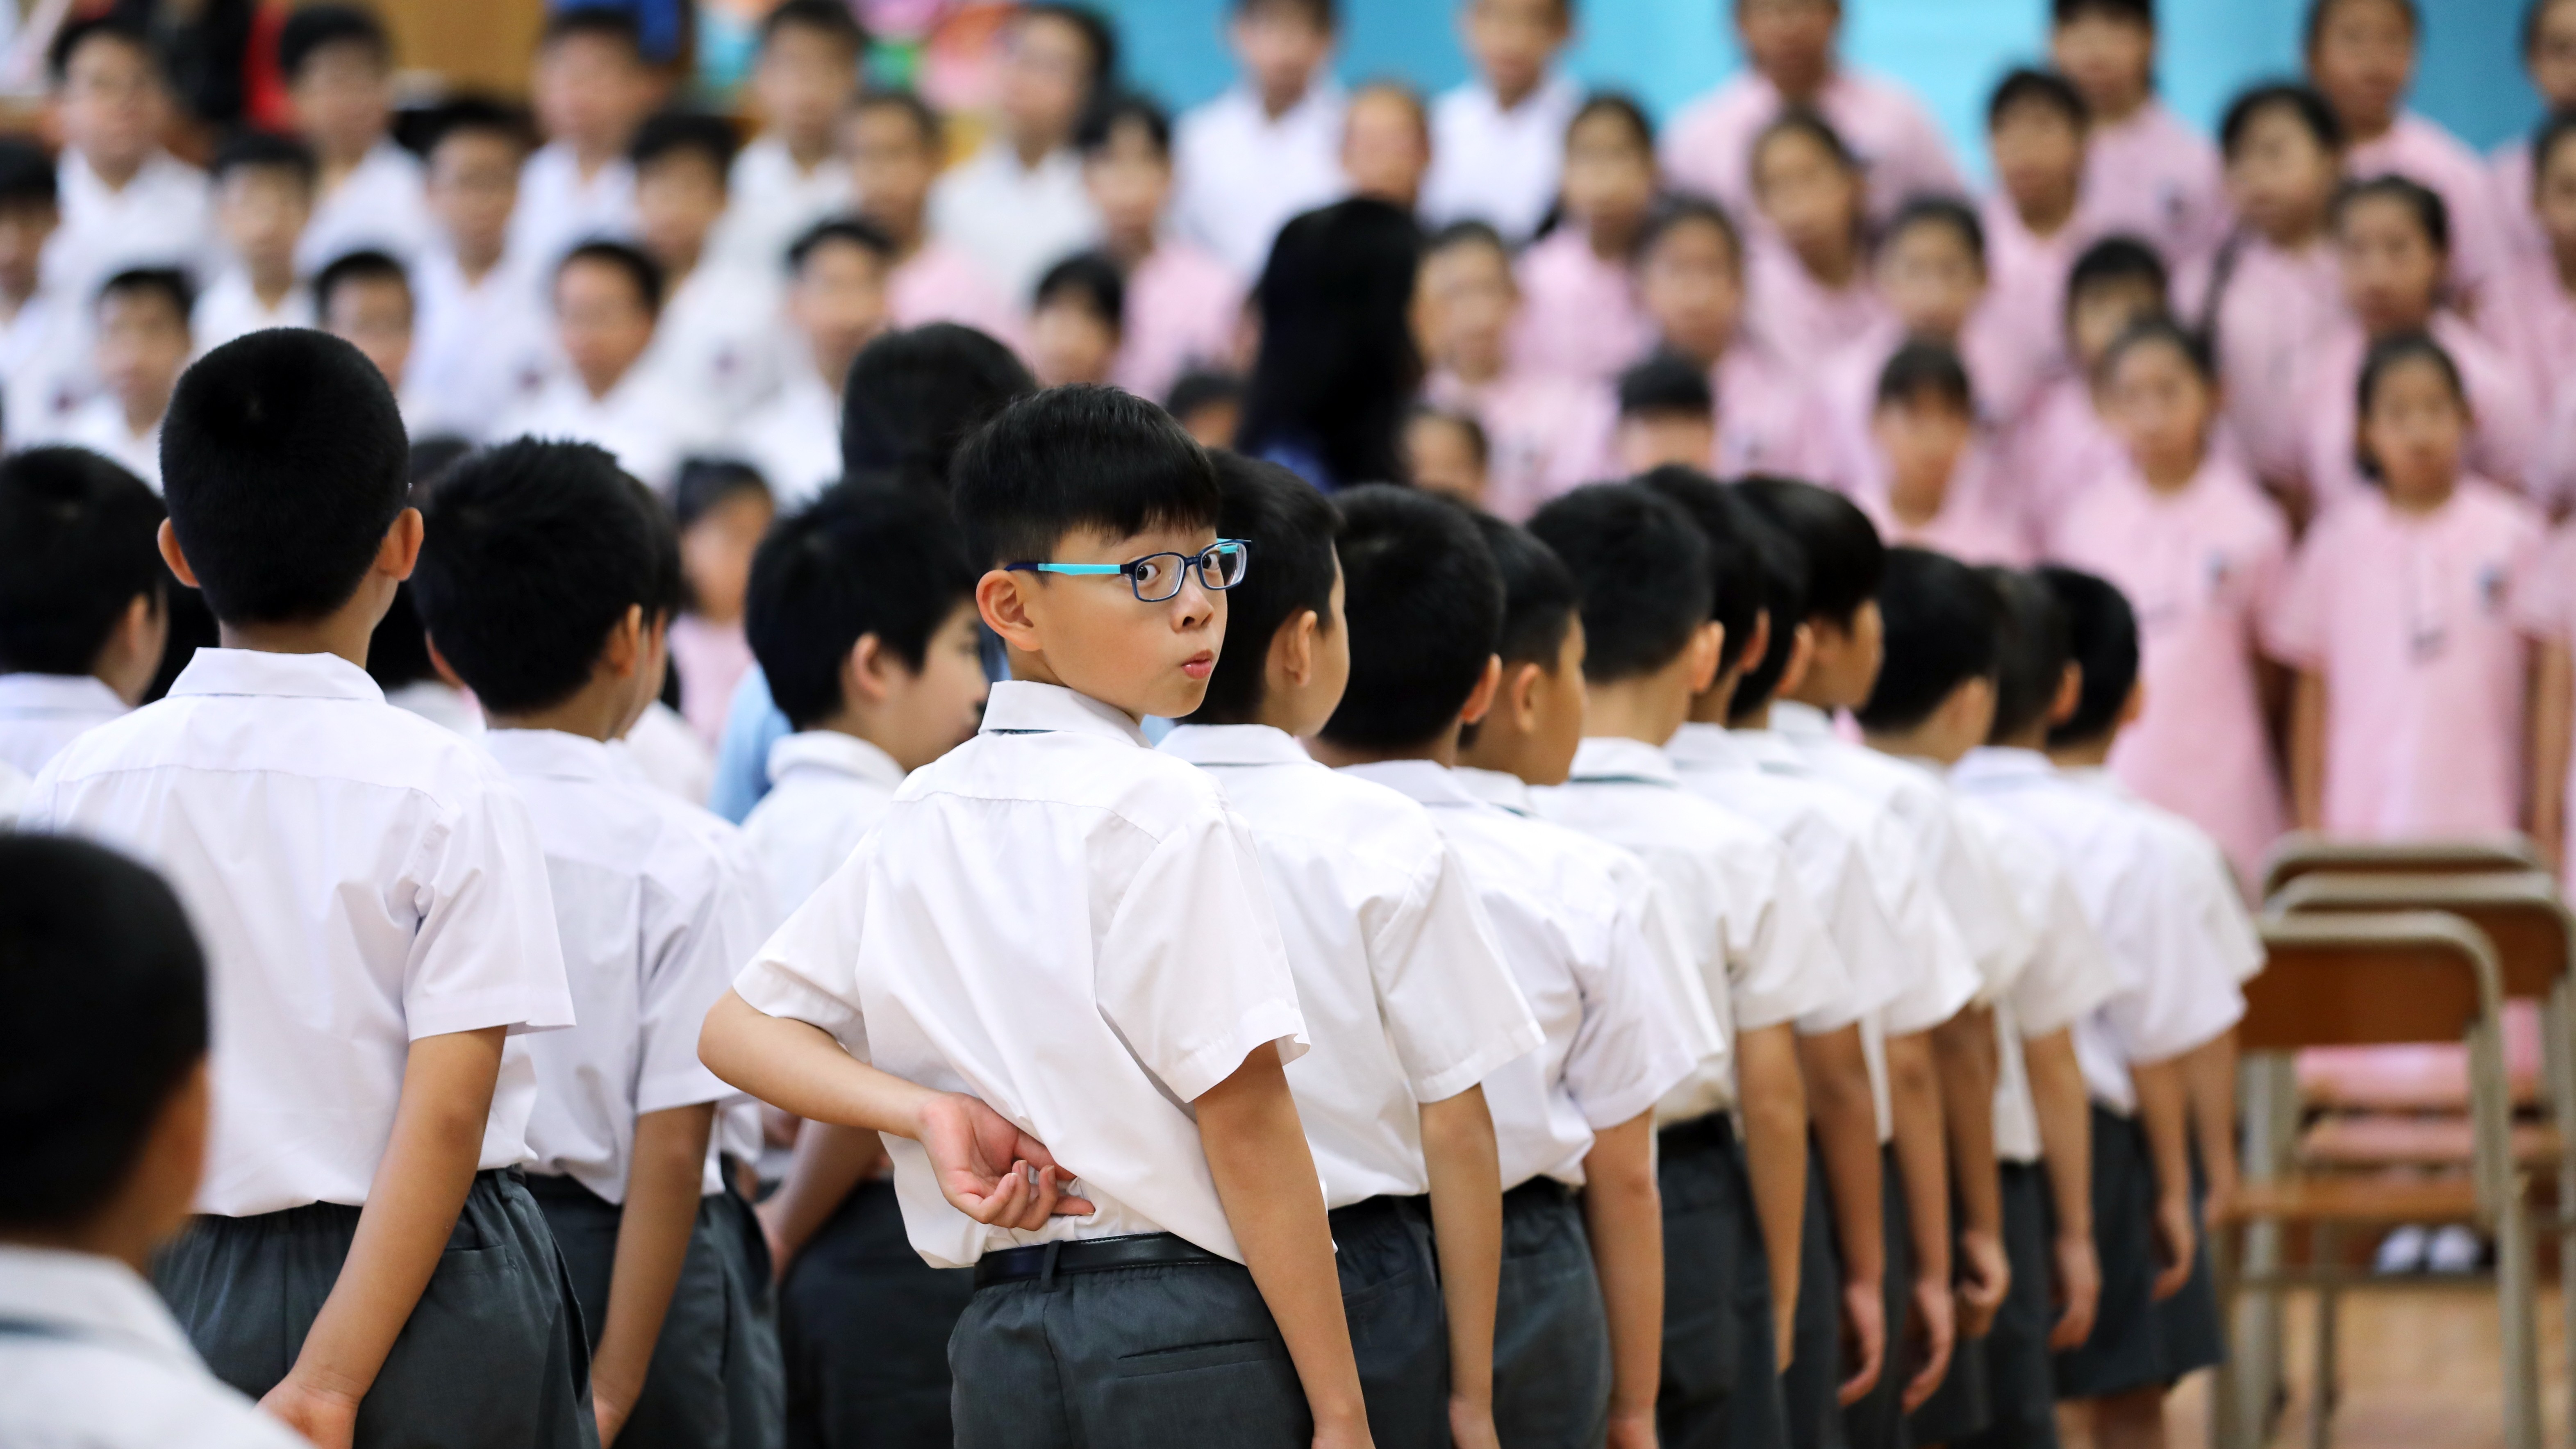 A new school year started in September in Hong Kong, including at the King's College Old Boys' Association Primary School No.2. The Hong Kong government is still reviewing the school curriculum. Photo: Sam Tsang